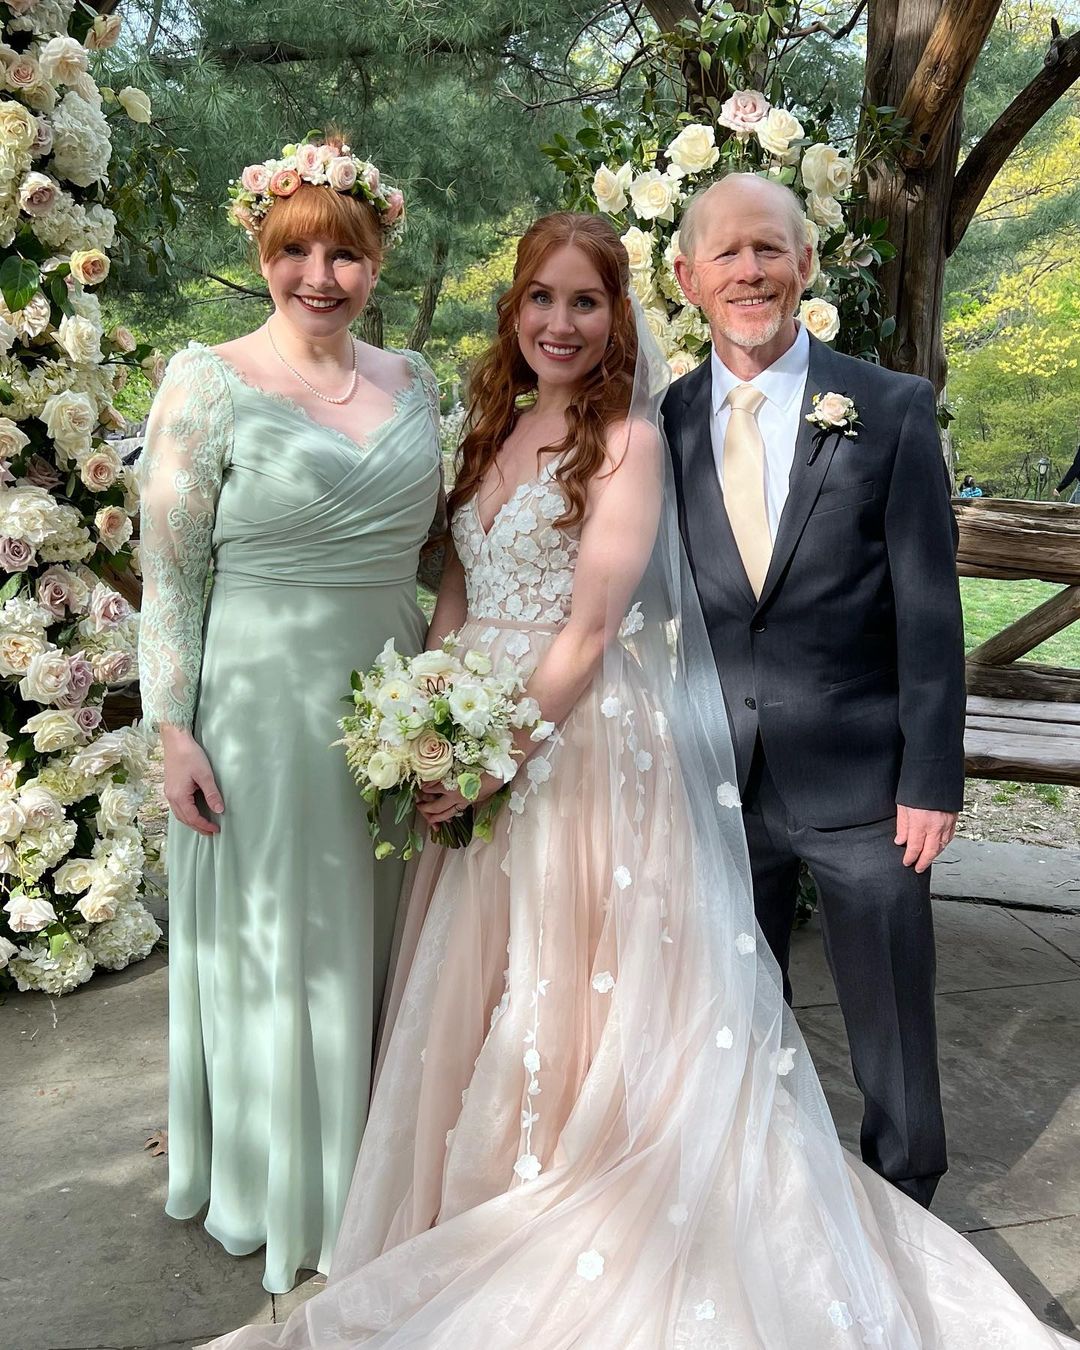 Bryce Dallas Howard and her father, Ron Howard, at her sister’s wedding.